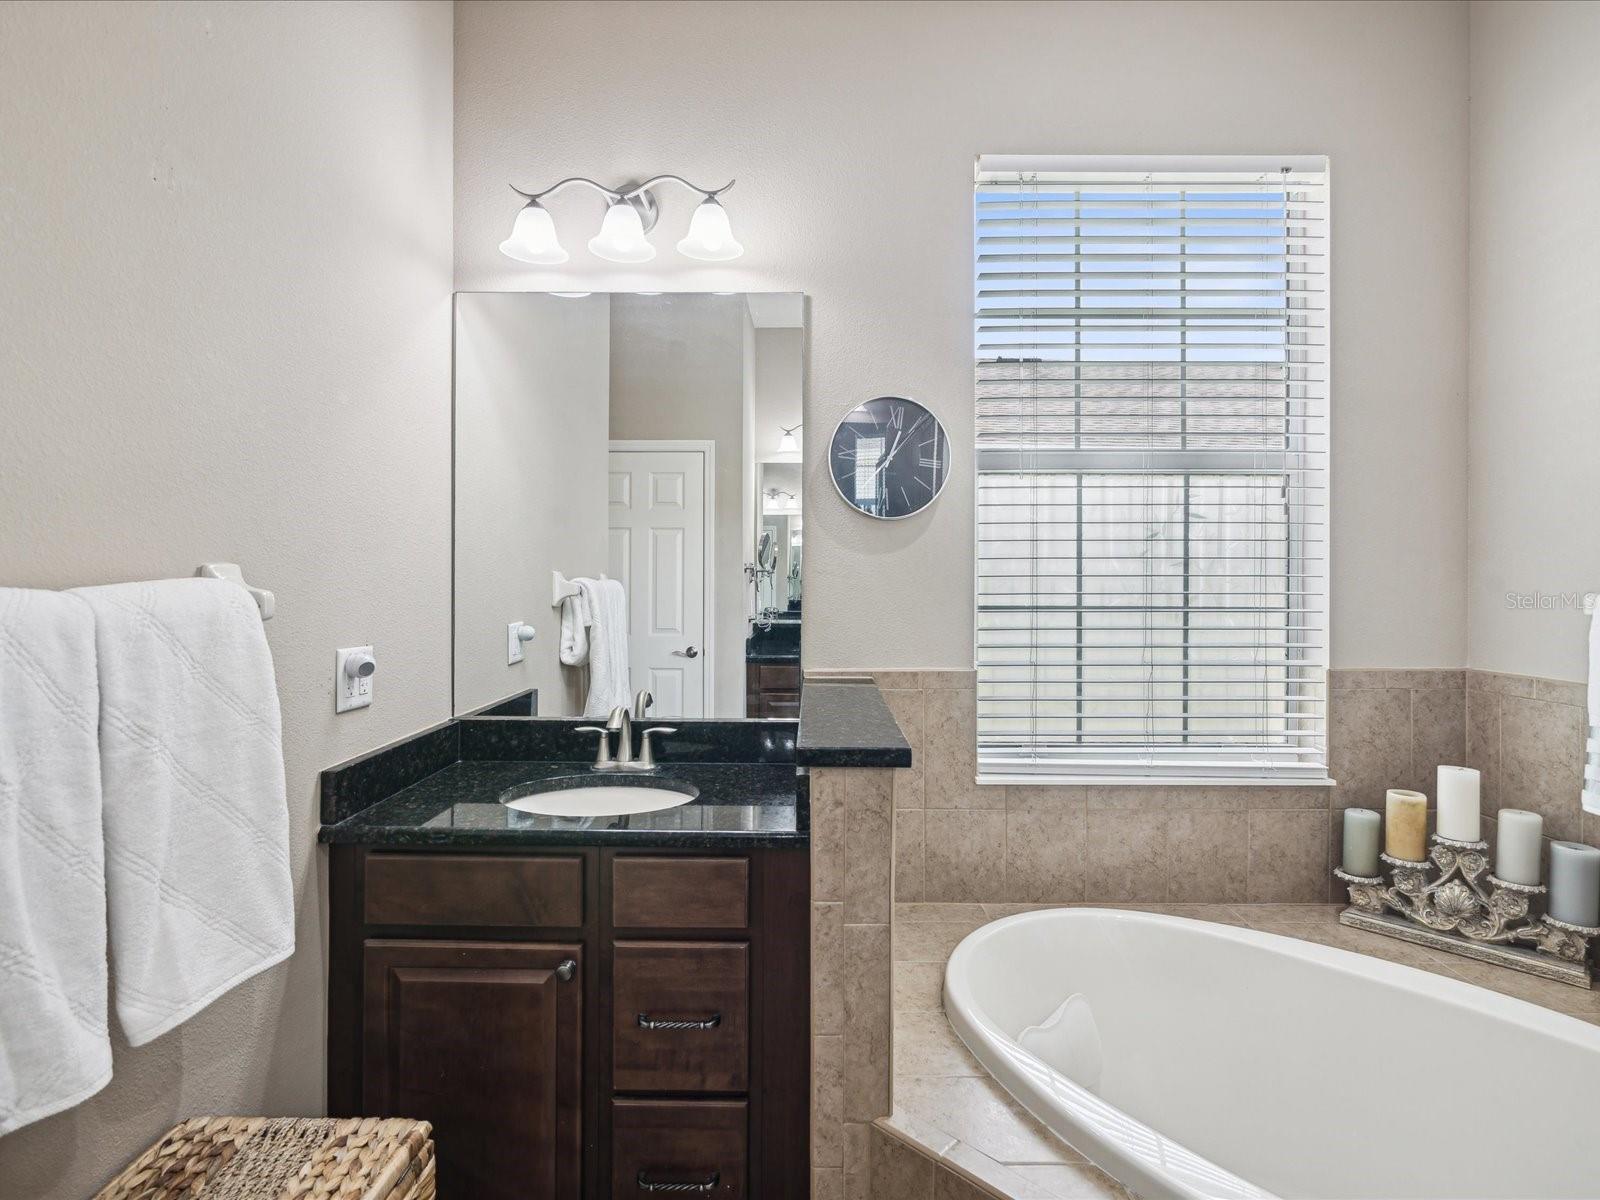 Separate vanities allow for more personal space and extra storage.